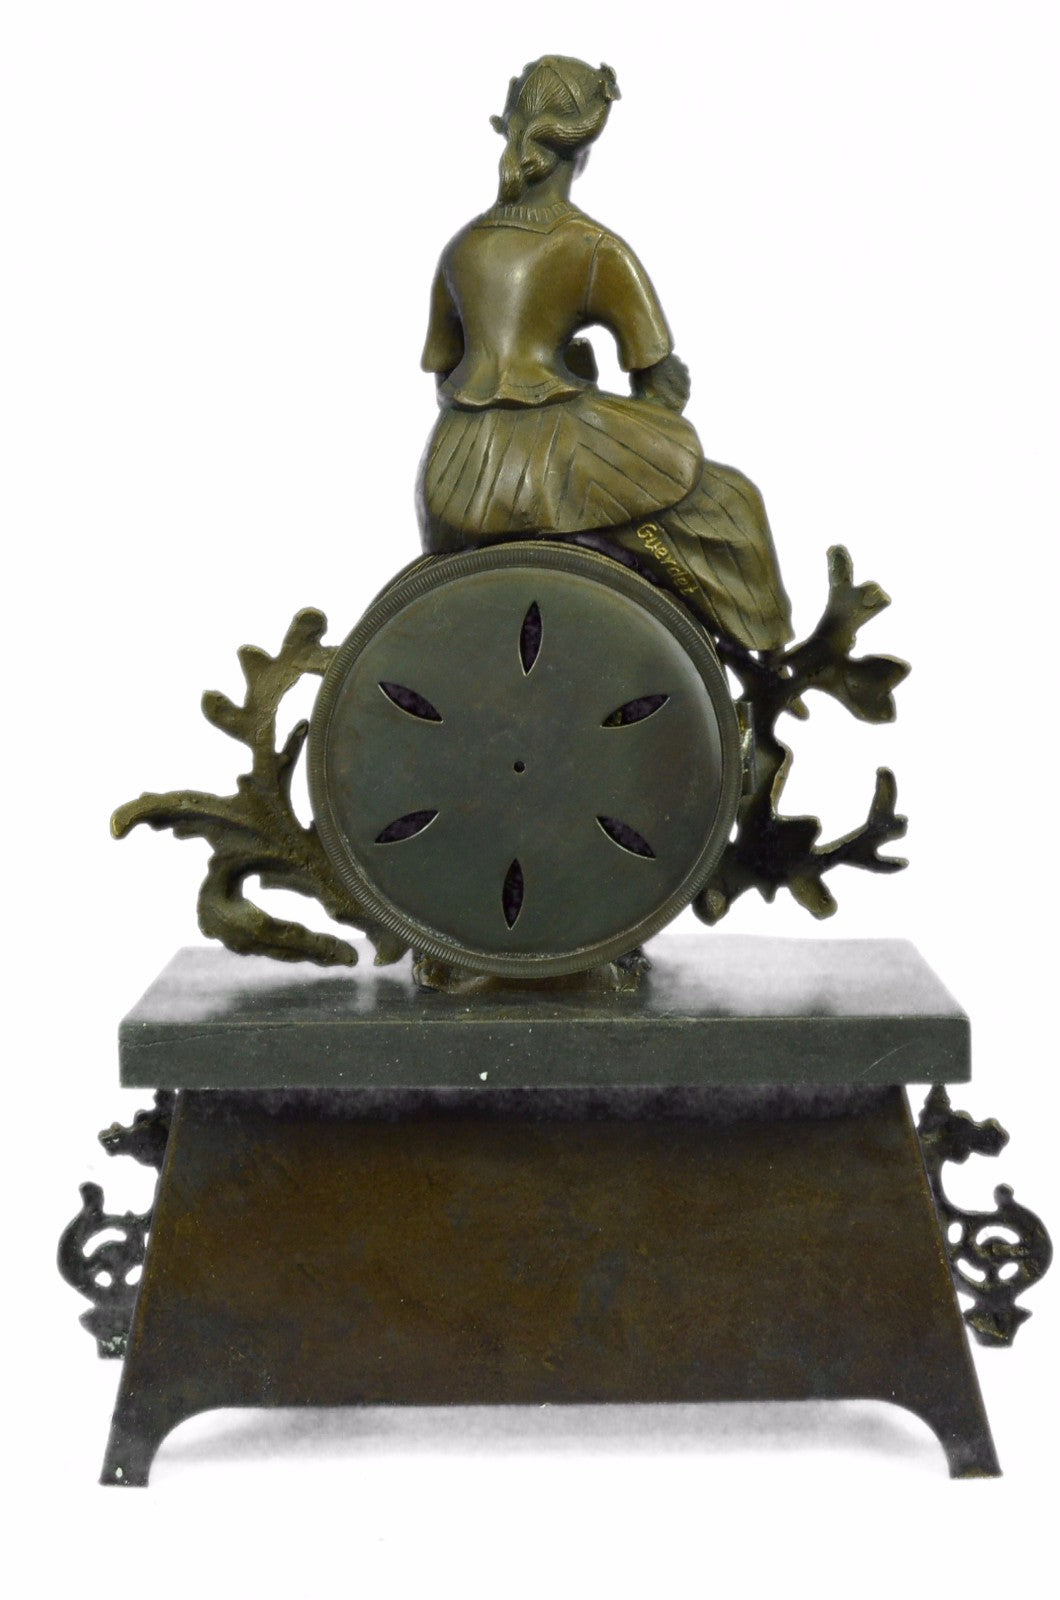 Magnificent Prize Winning Ormolu/Bronze Clock By "Moreau " French Artist Statue